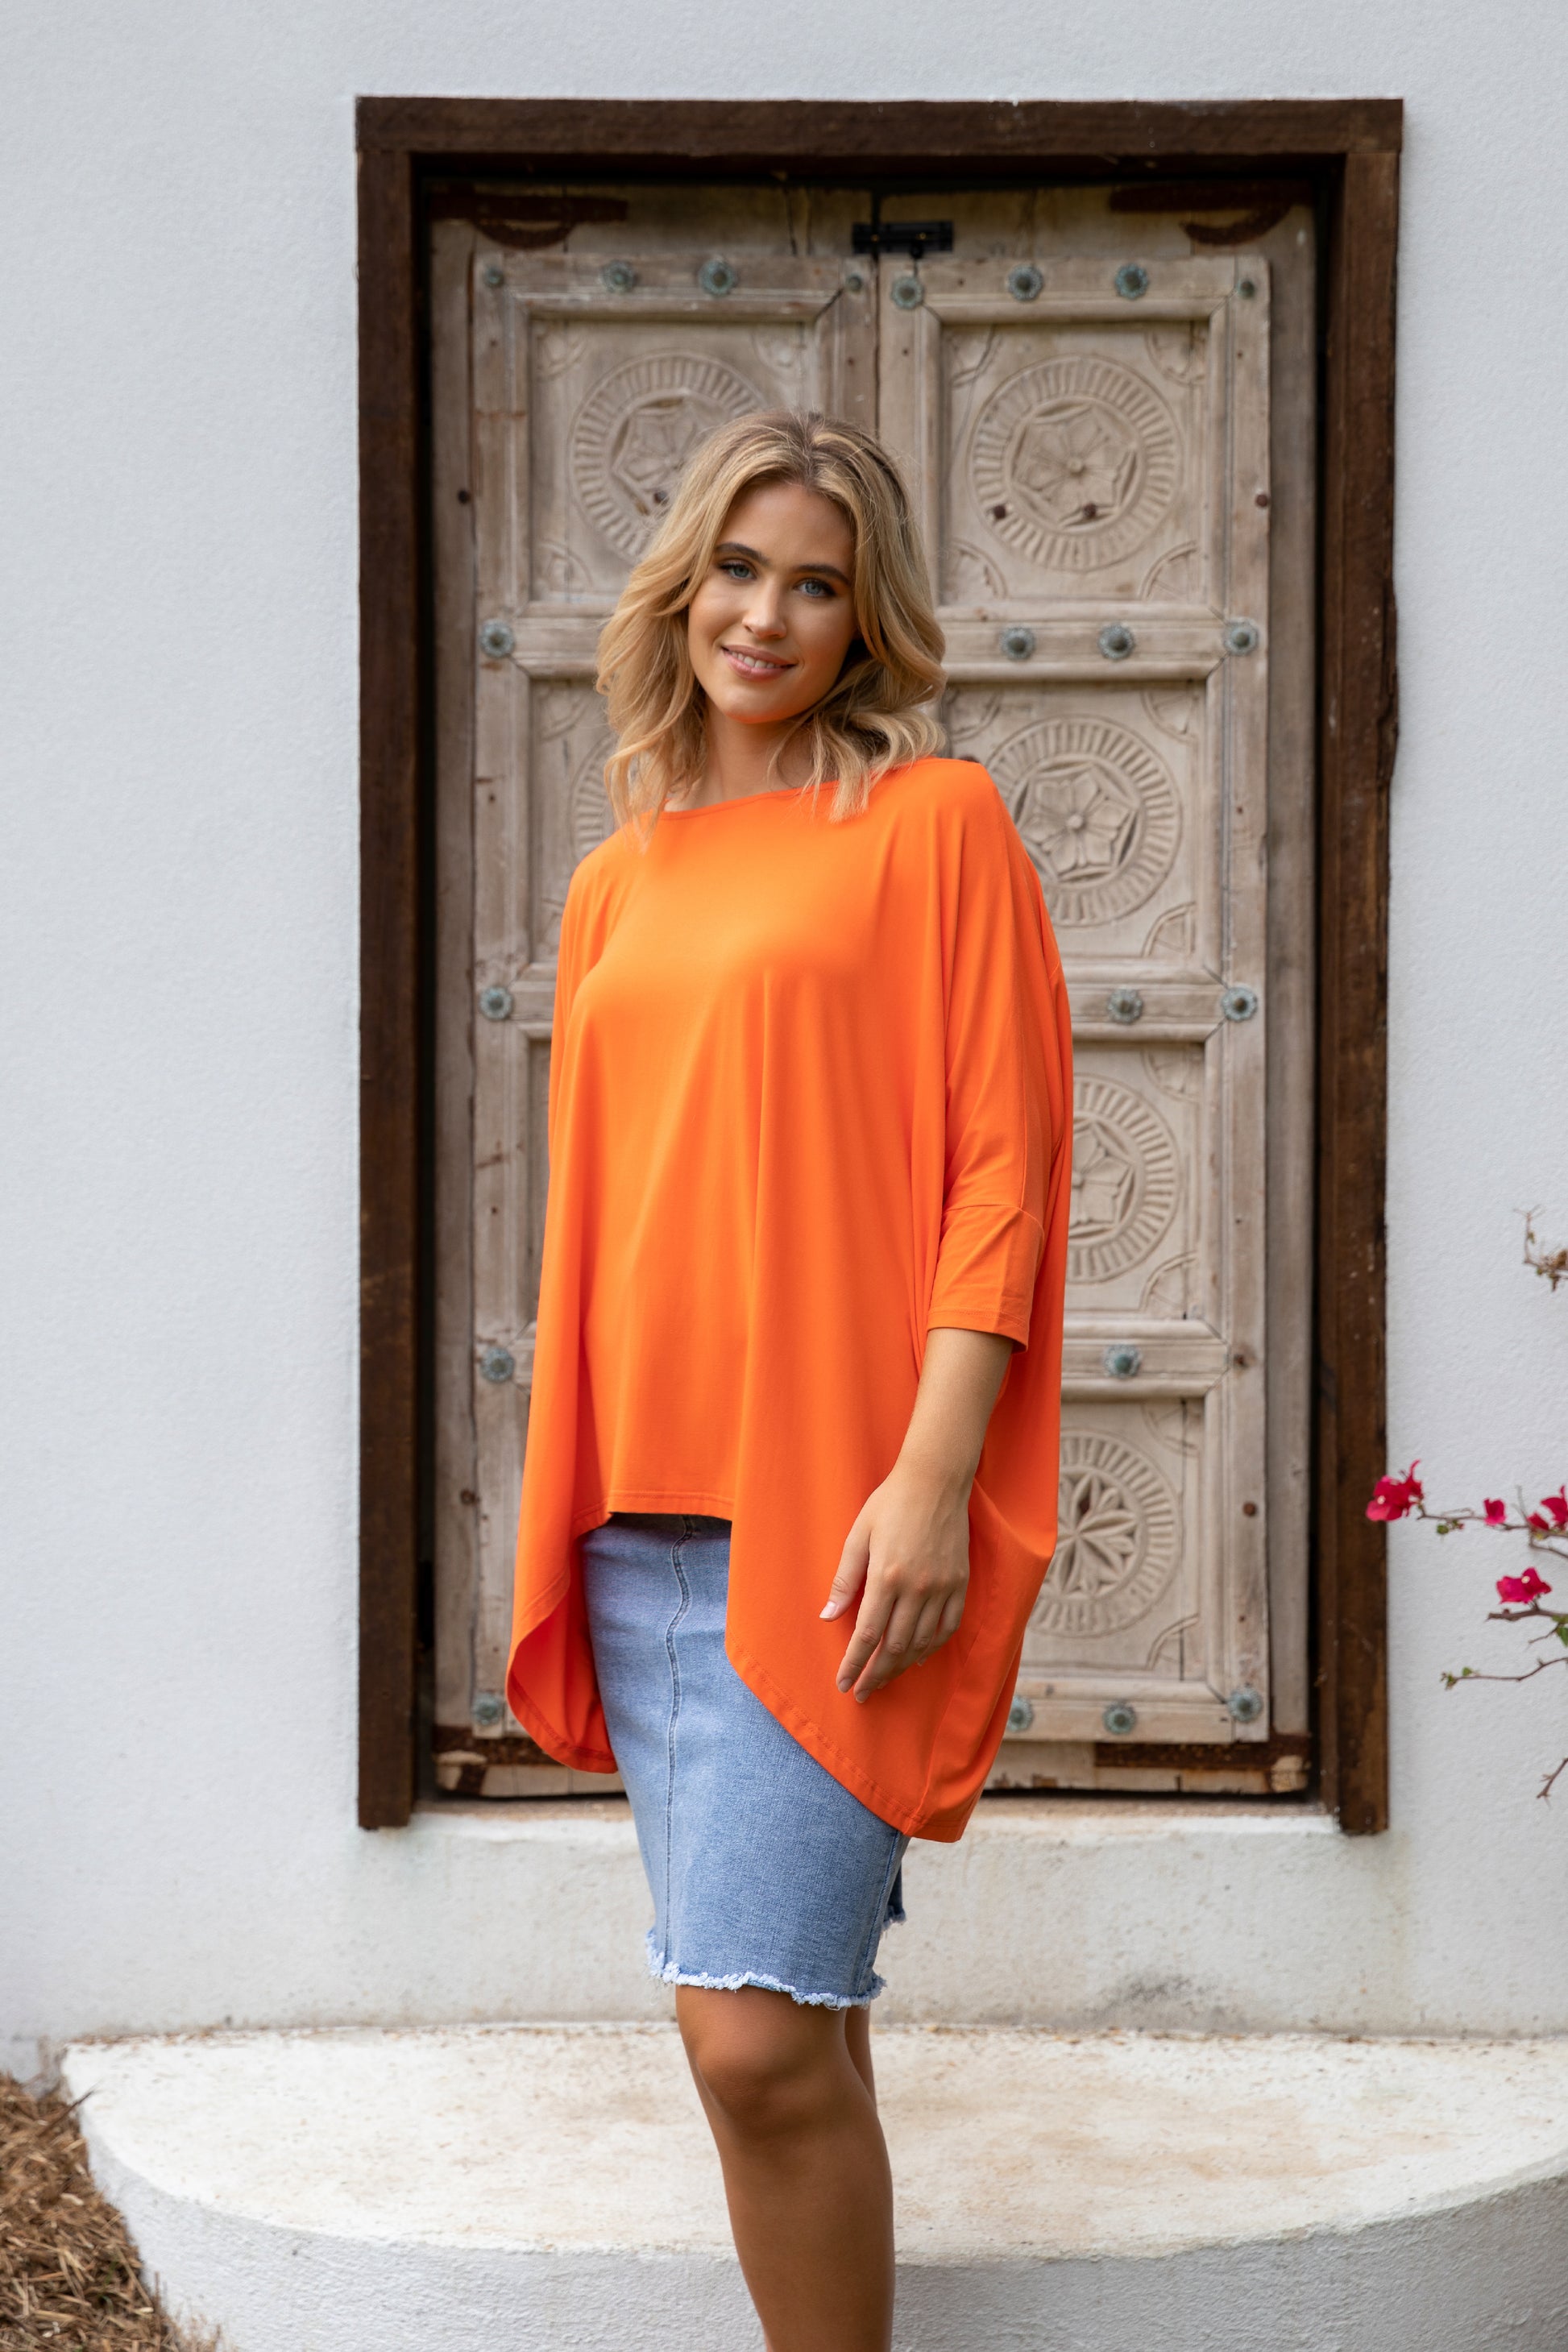 Plus-Sized Orange Top | PQ Collection | Simplicity Top in Scarlett